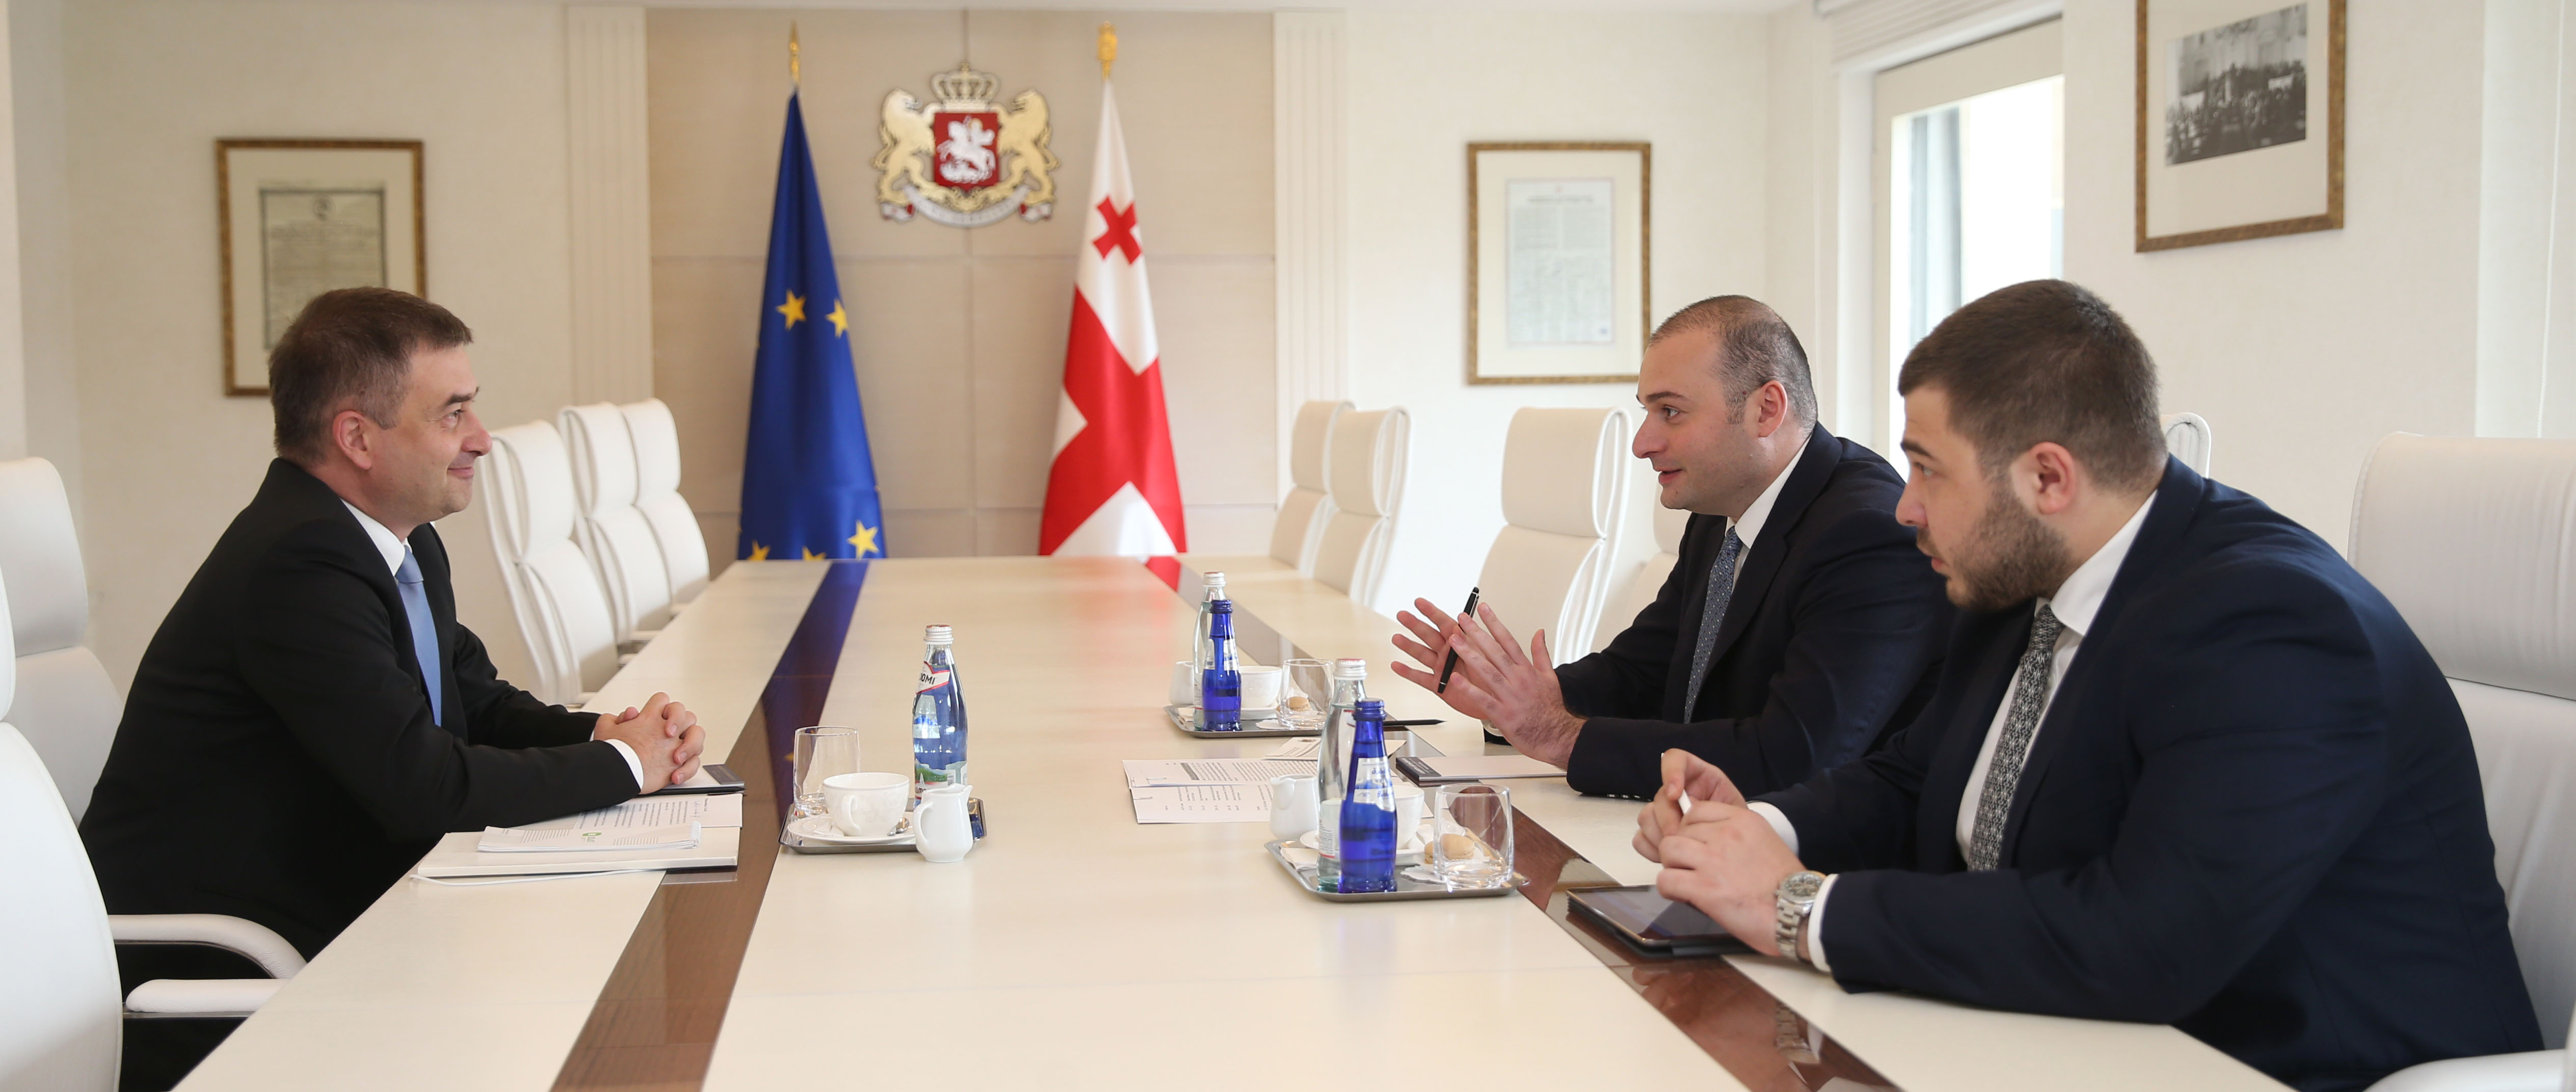 The Head of the Council of Europe Office in Georgia met with the Prime Minister